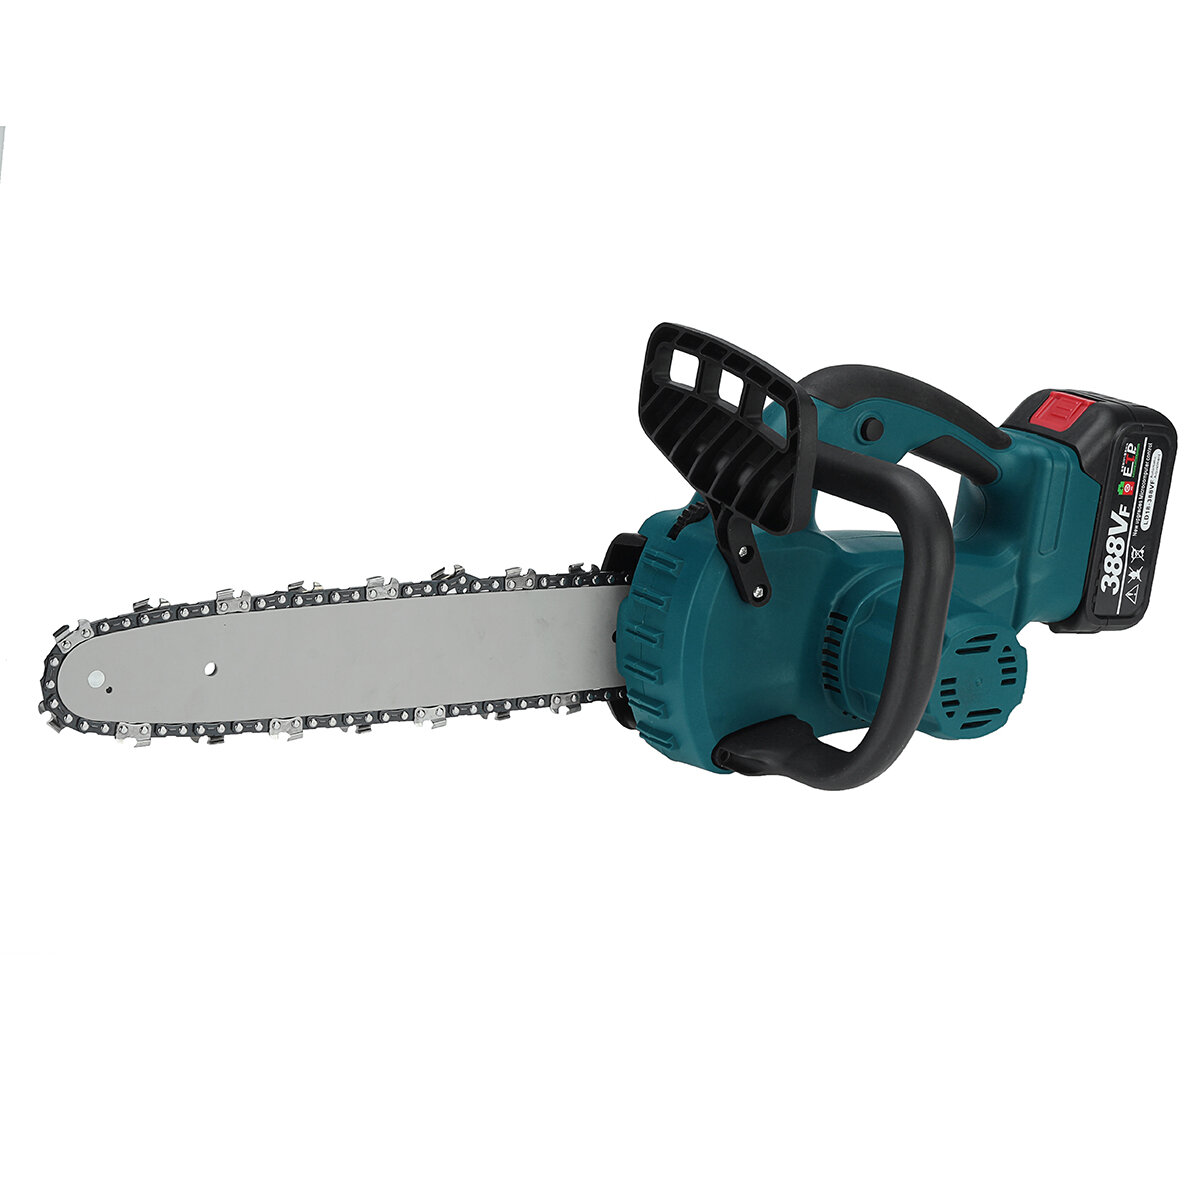 best price,388vf,inch,electric,chain,saw,with,batteries,eu,discount